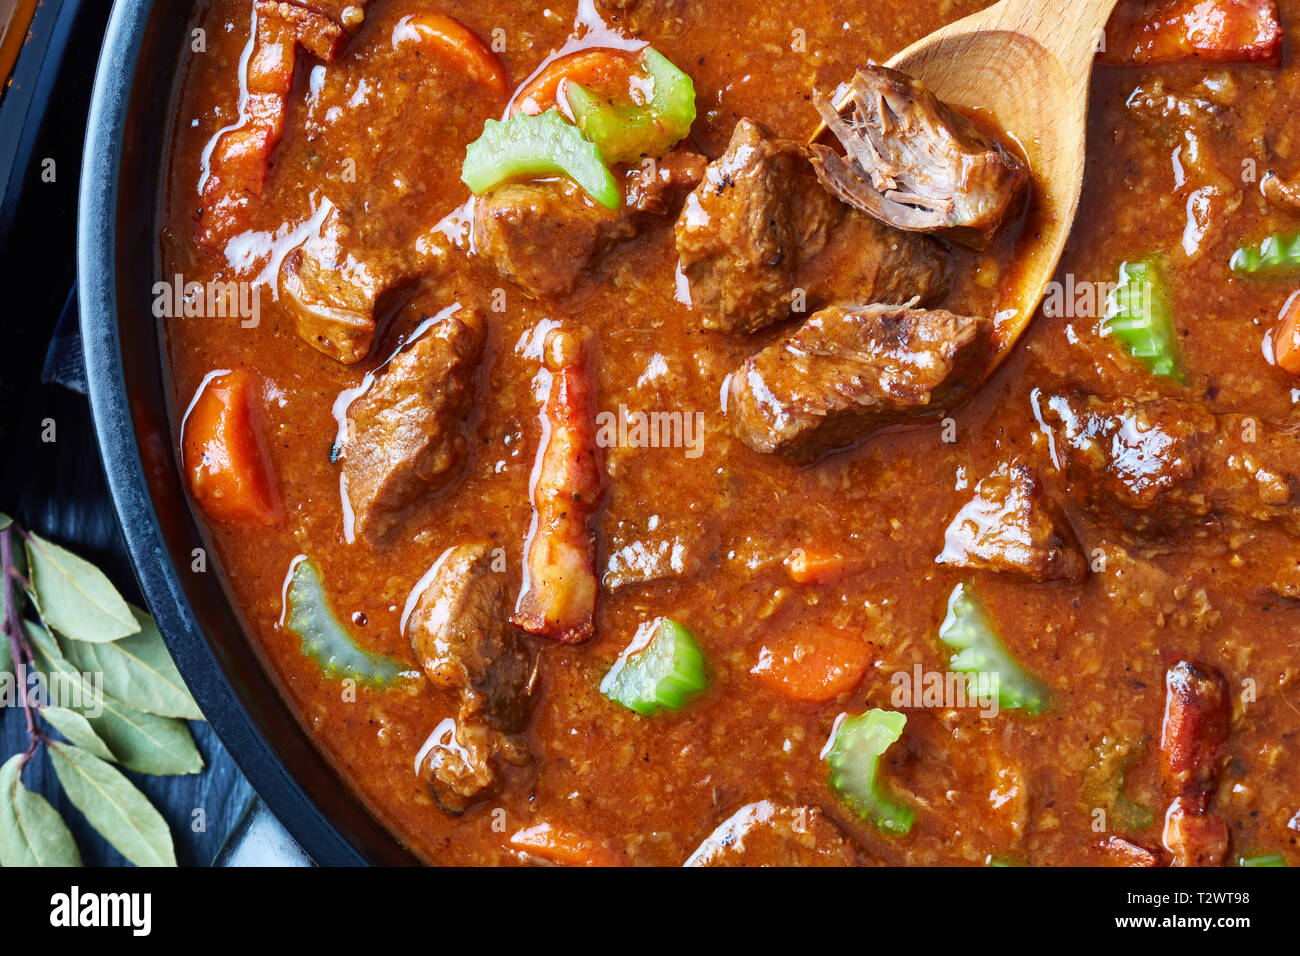 overhead view of traditional irish beef and beer stew with carrots, celery stalk, carrots and spices in a dutch oven on a black wooden table, view fro Stock Photo